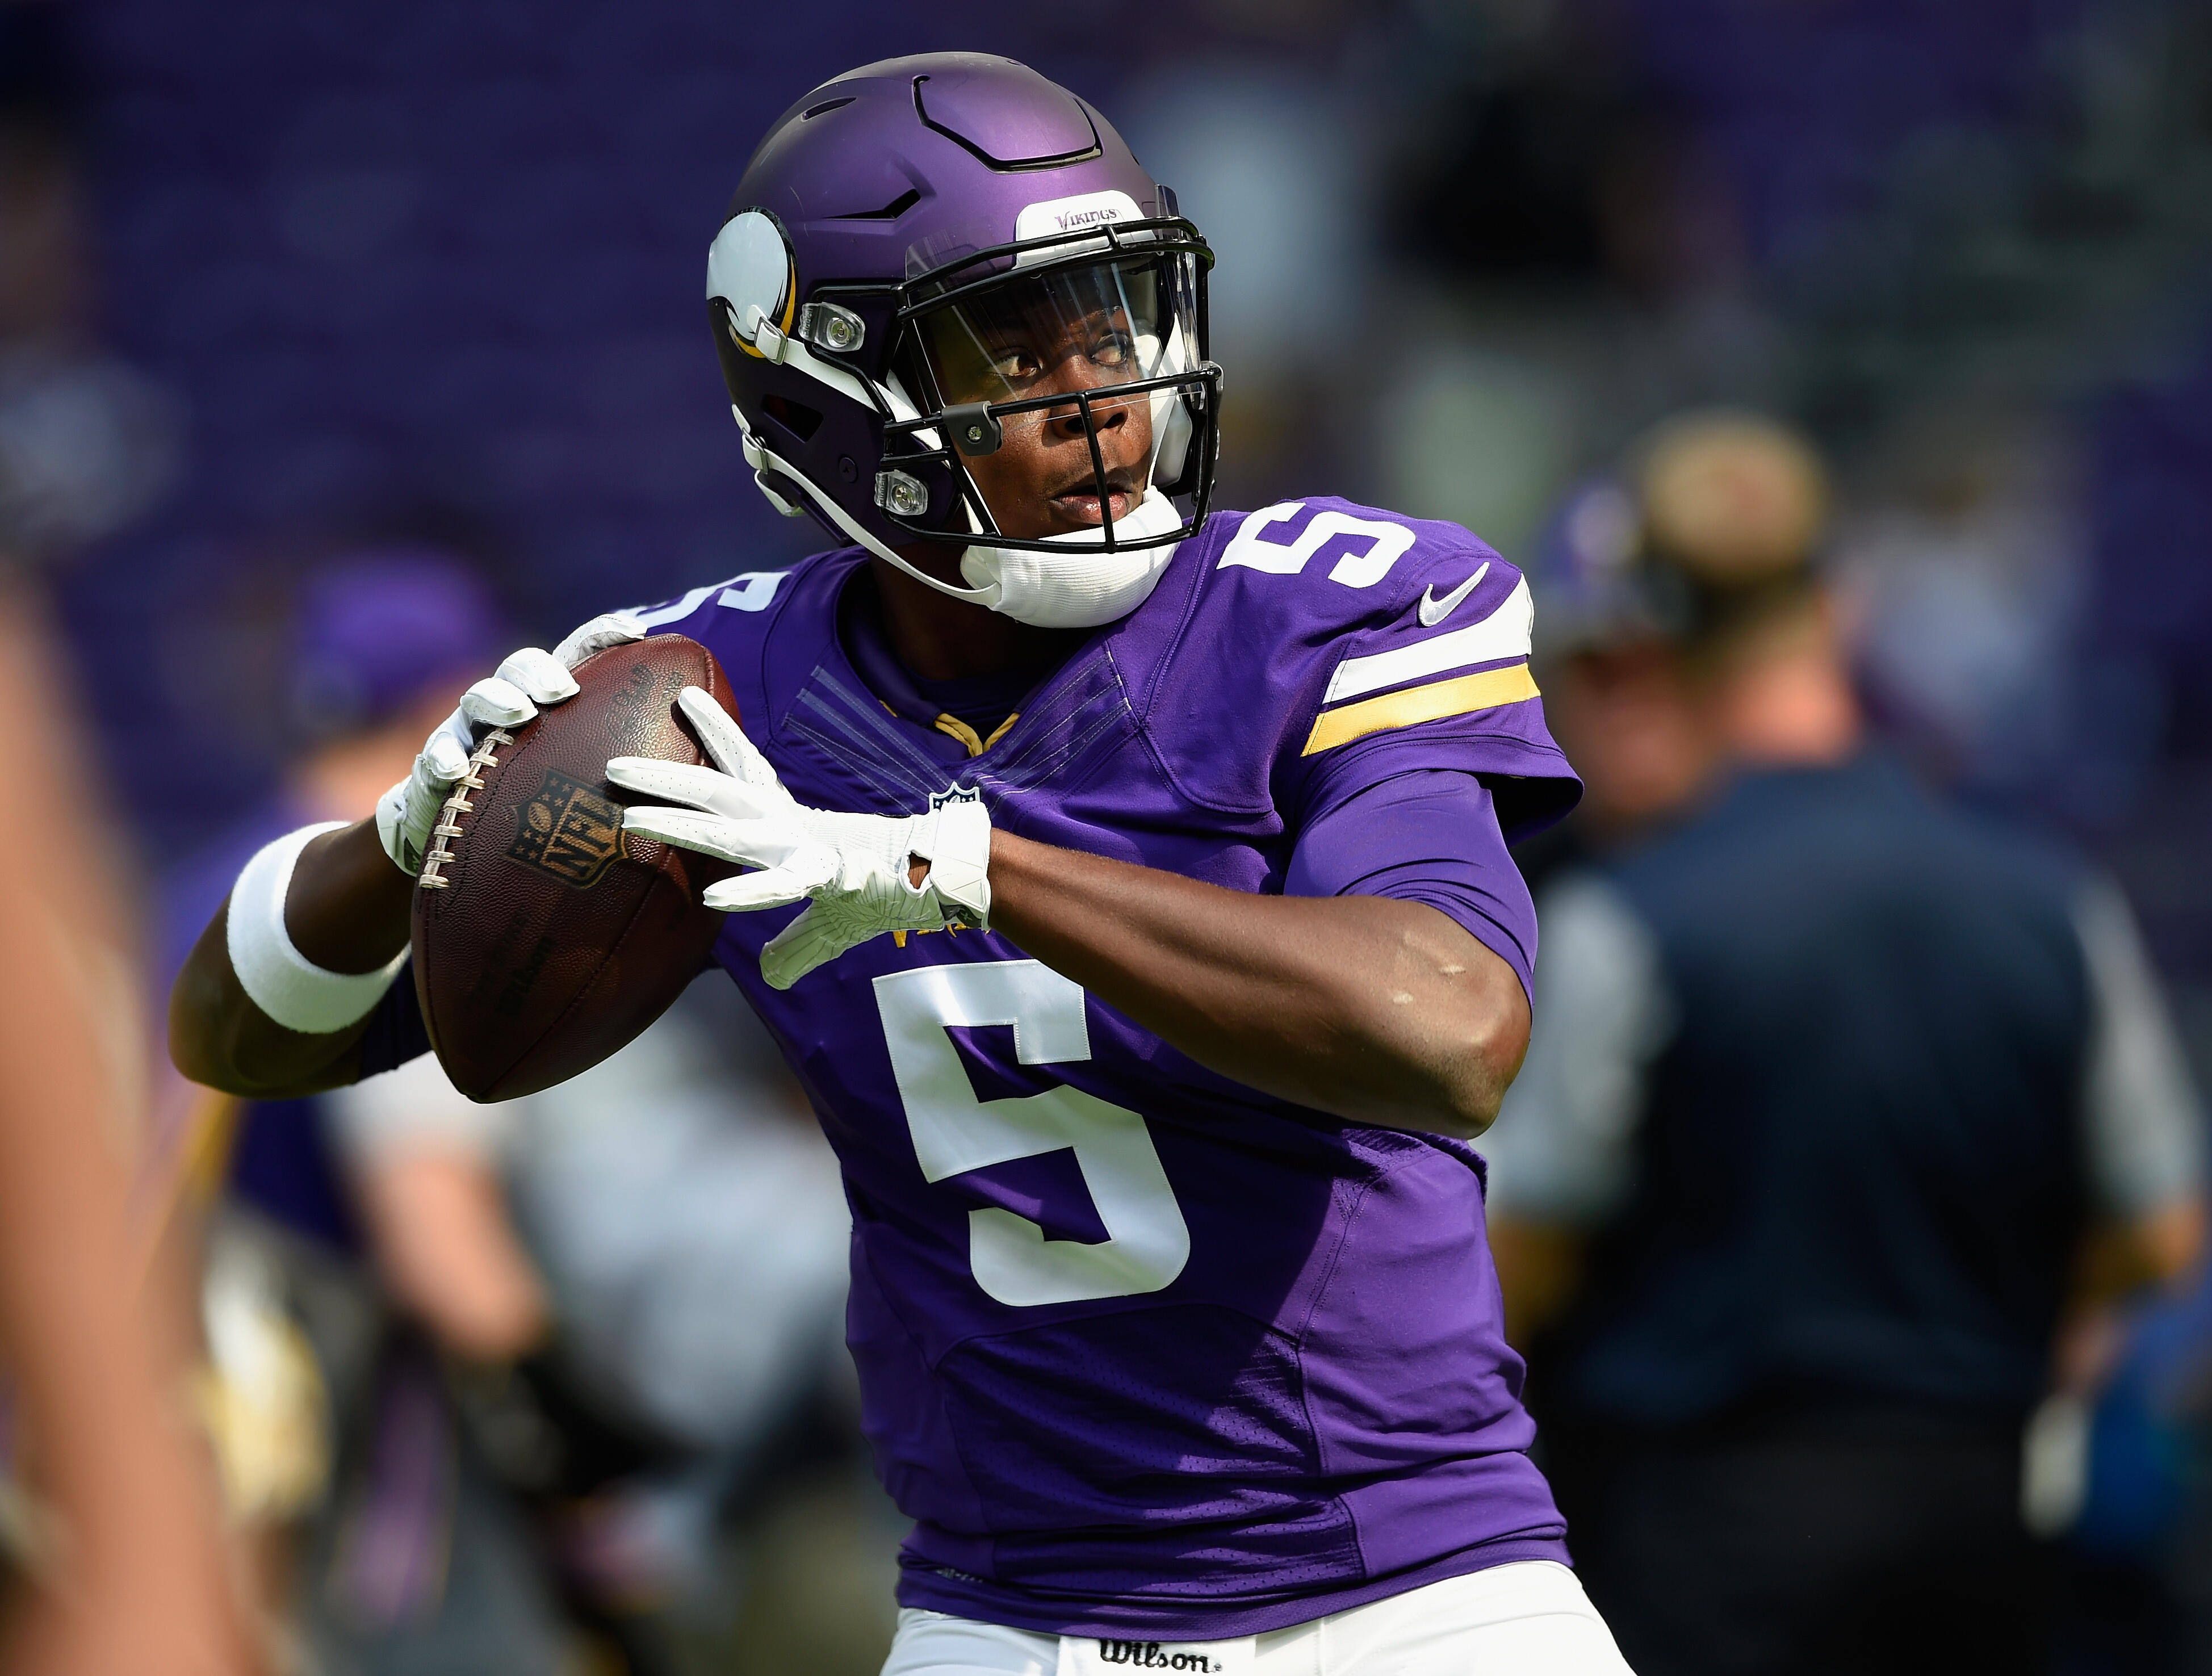 MINNEAPOLIS, MN - AUGUST 28: Teddy Bridgewater #5 of the Minnesota Vikings warms up before the game against the San Diego Chargers on August 28, 2016 at US Bank Stadium in Minneapolis, Minnesota. (Photo by Hannah Foslien/Getty Images)